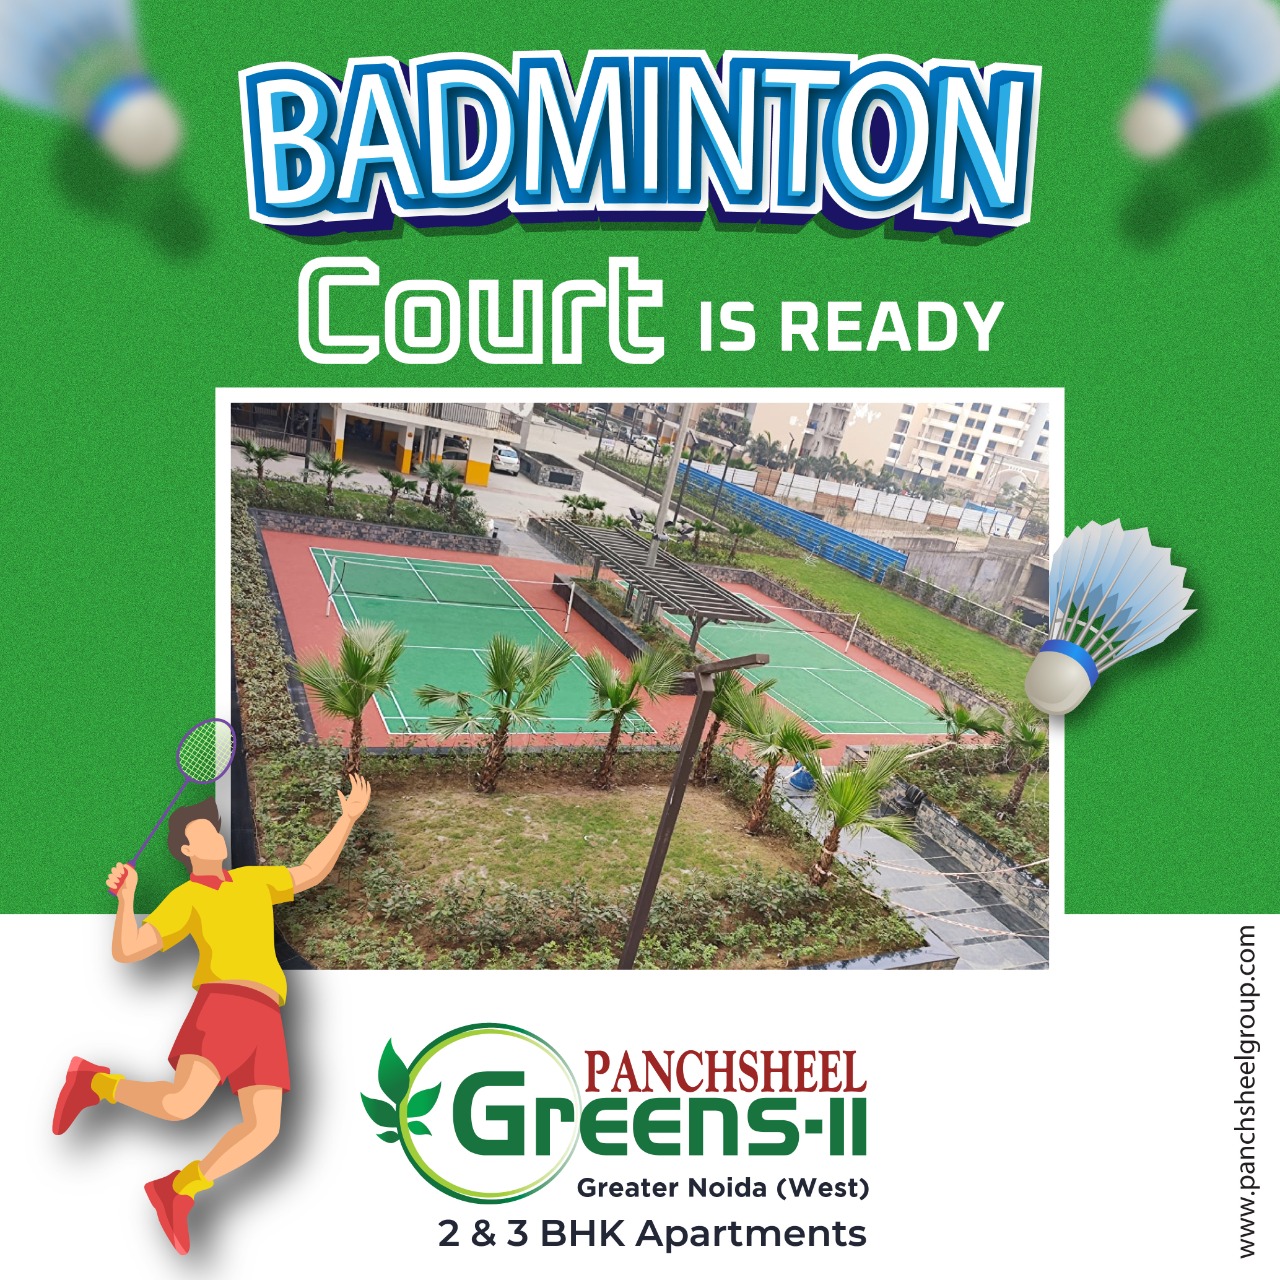 Badminton court is ready for resident at Panchsheel Greens 2, Greater Noida Update